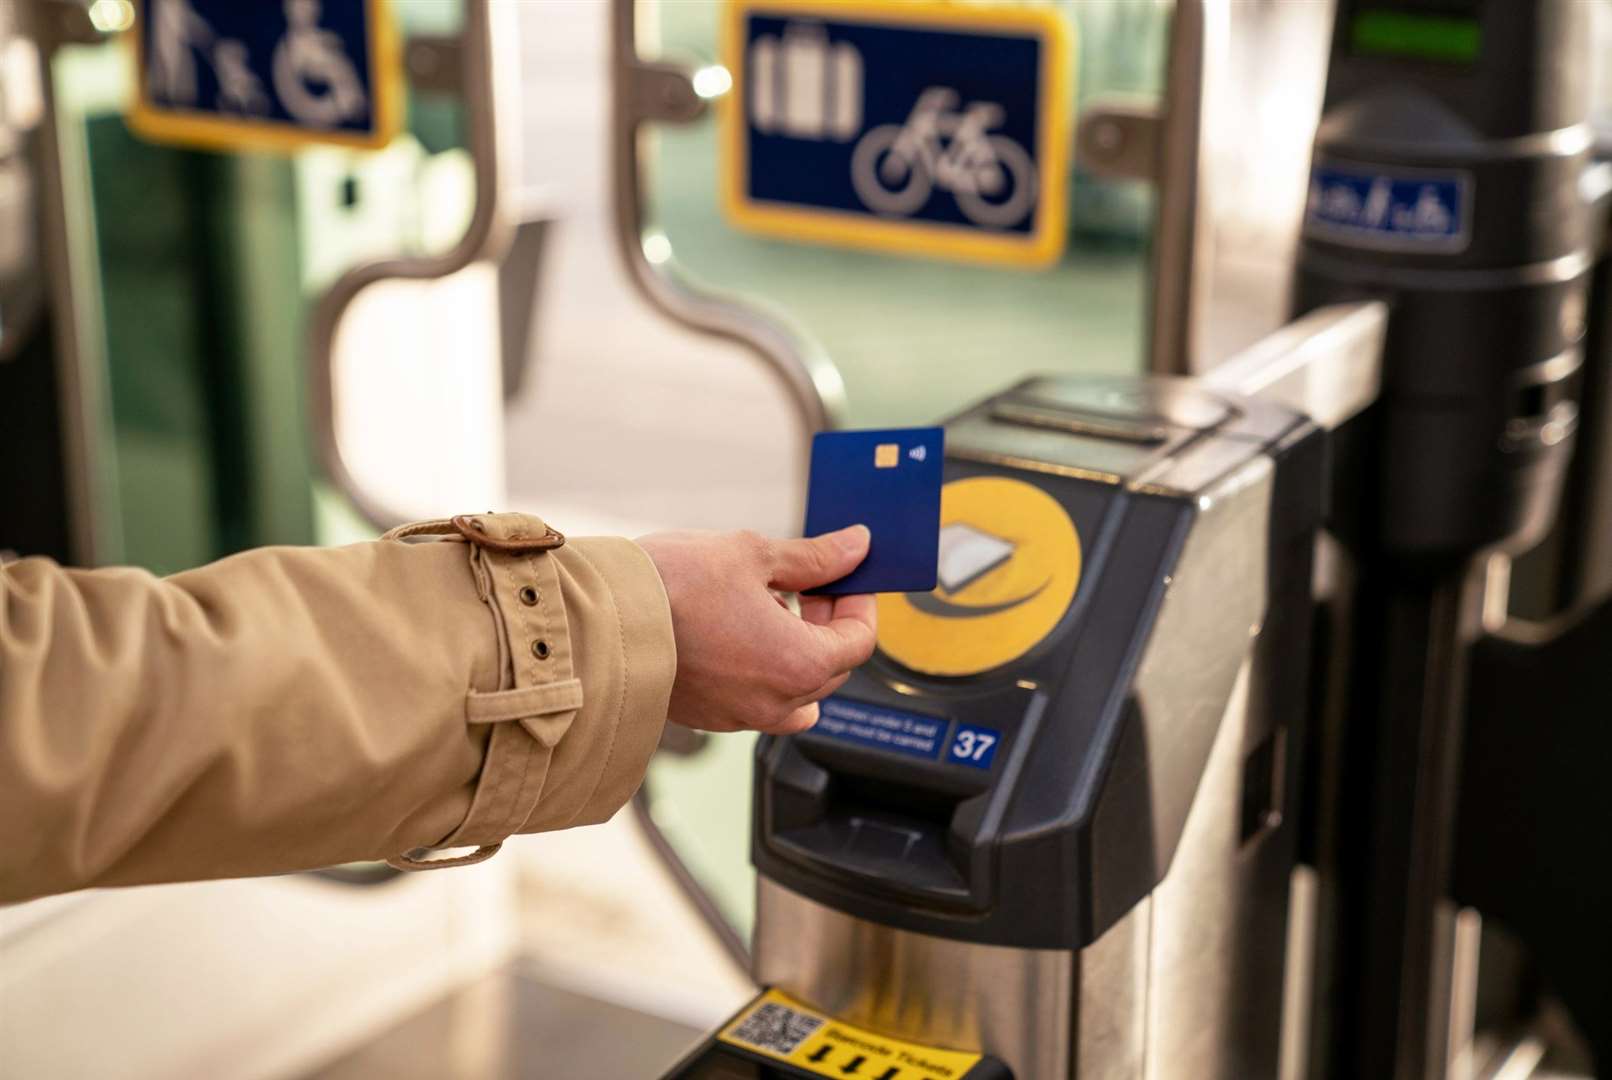 Passengers will need to use Oyster cards or contactless cards in London from January. Picture: iStock.